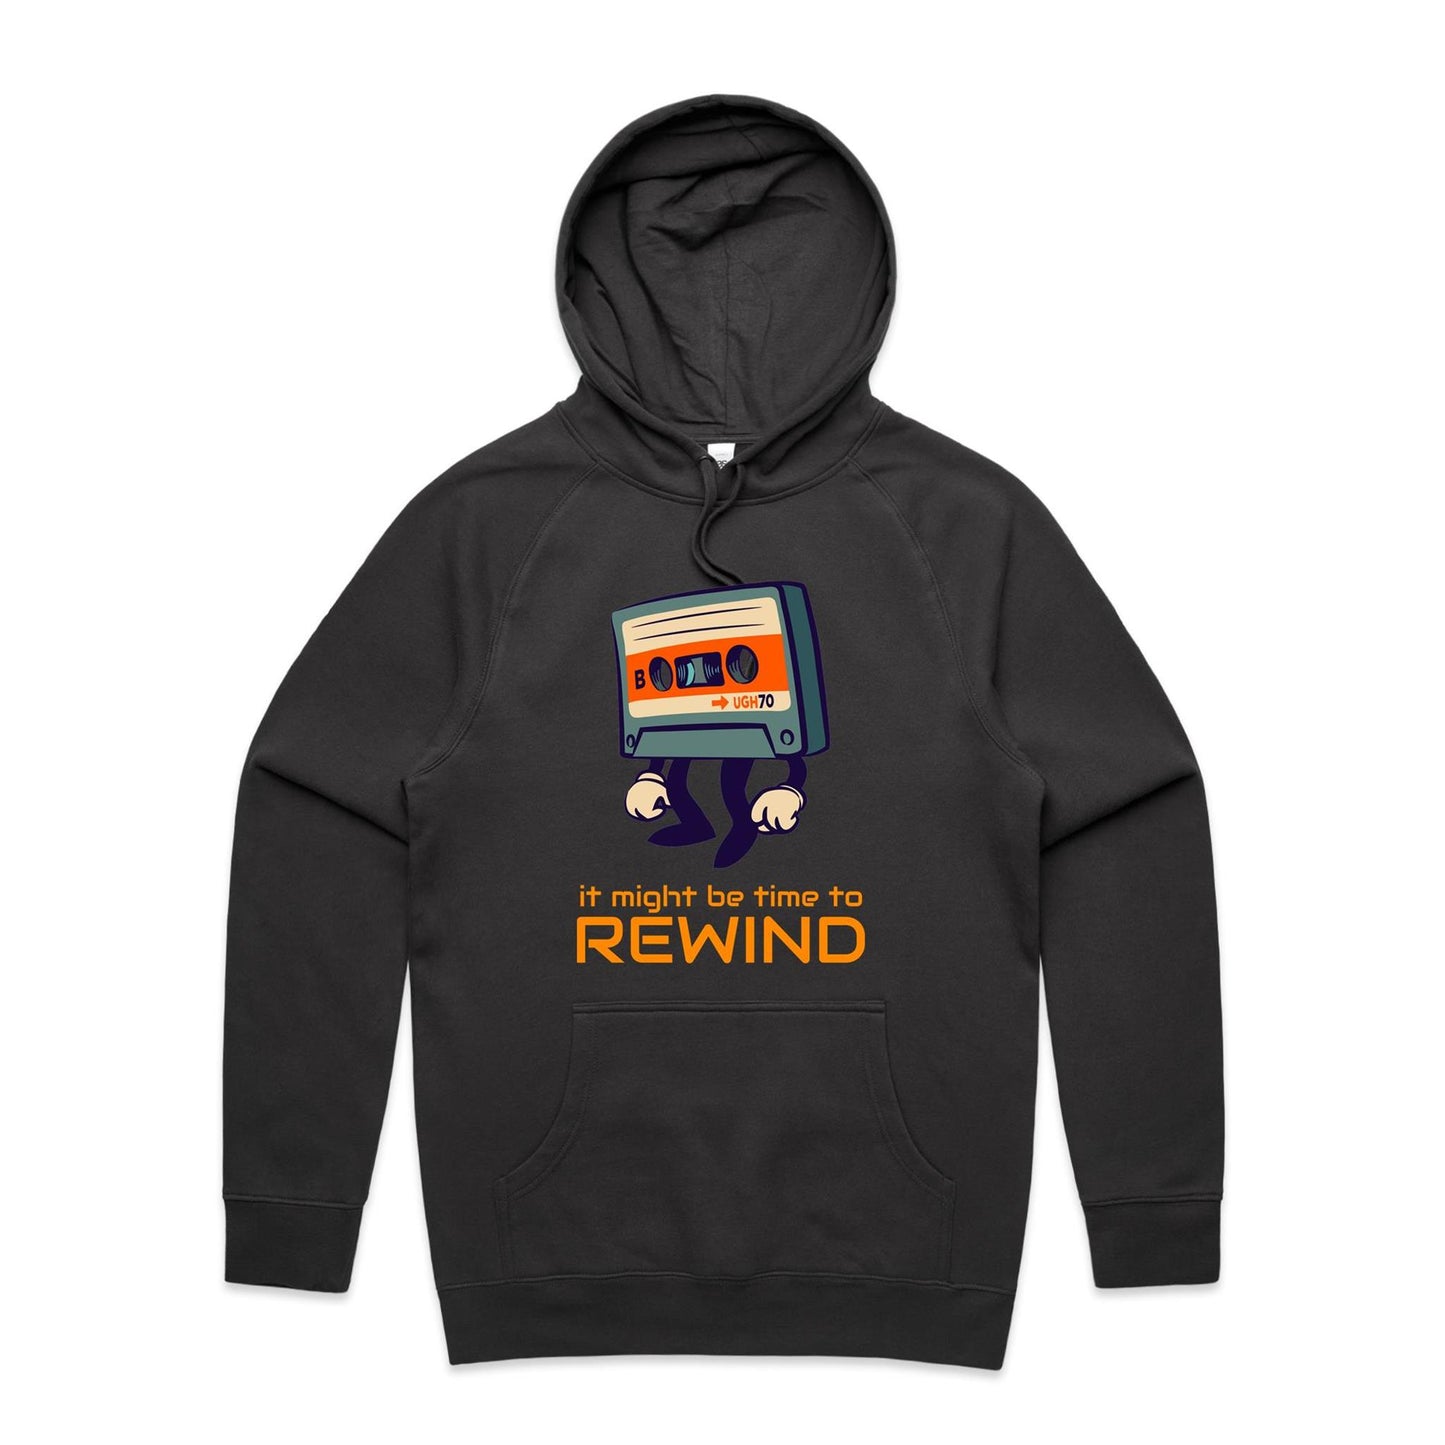 It Might Be Time To Rewind - Supply Hood Coal Mens Supply Hoodie Music Retro